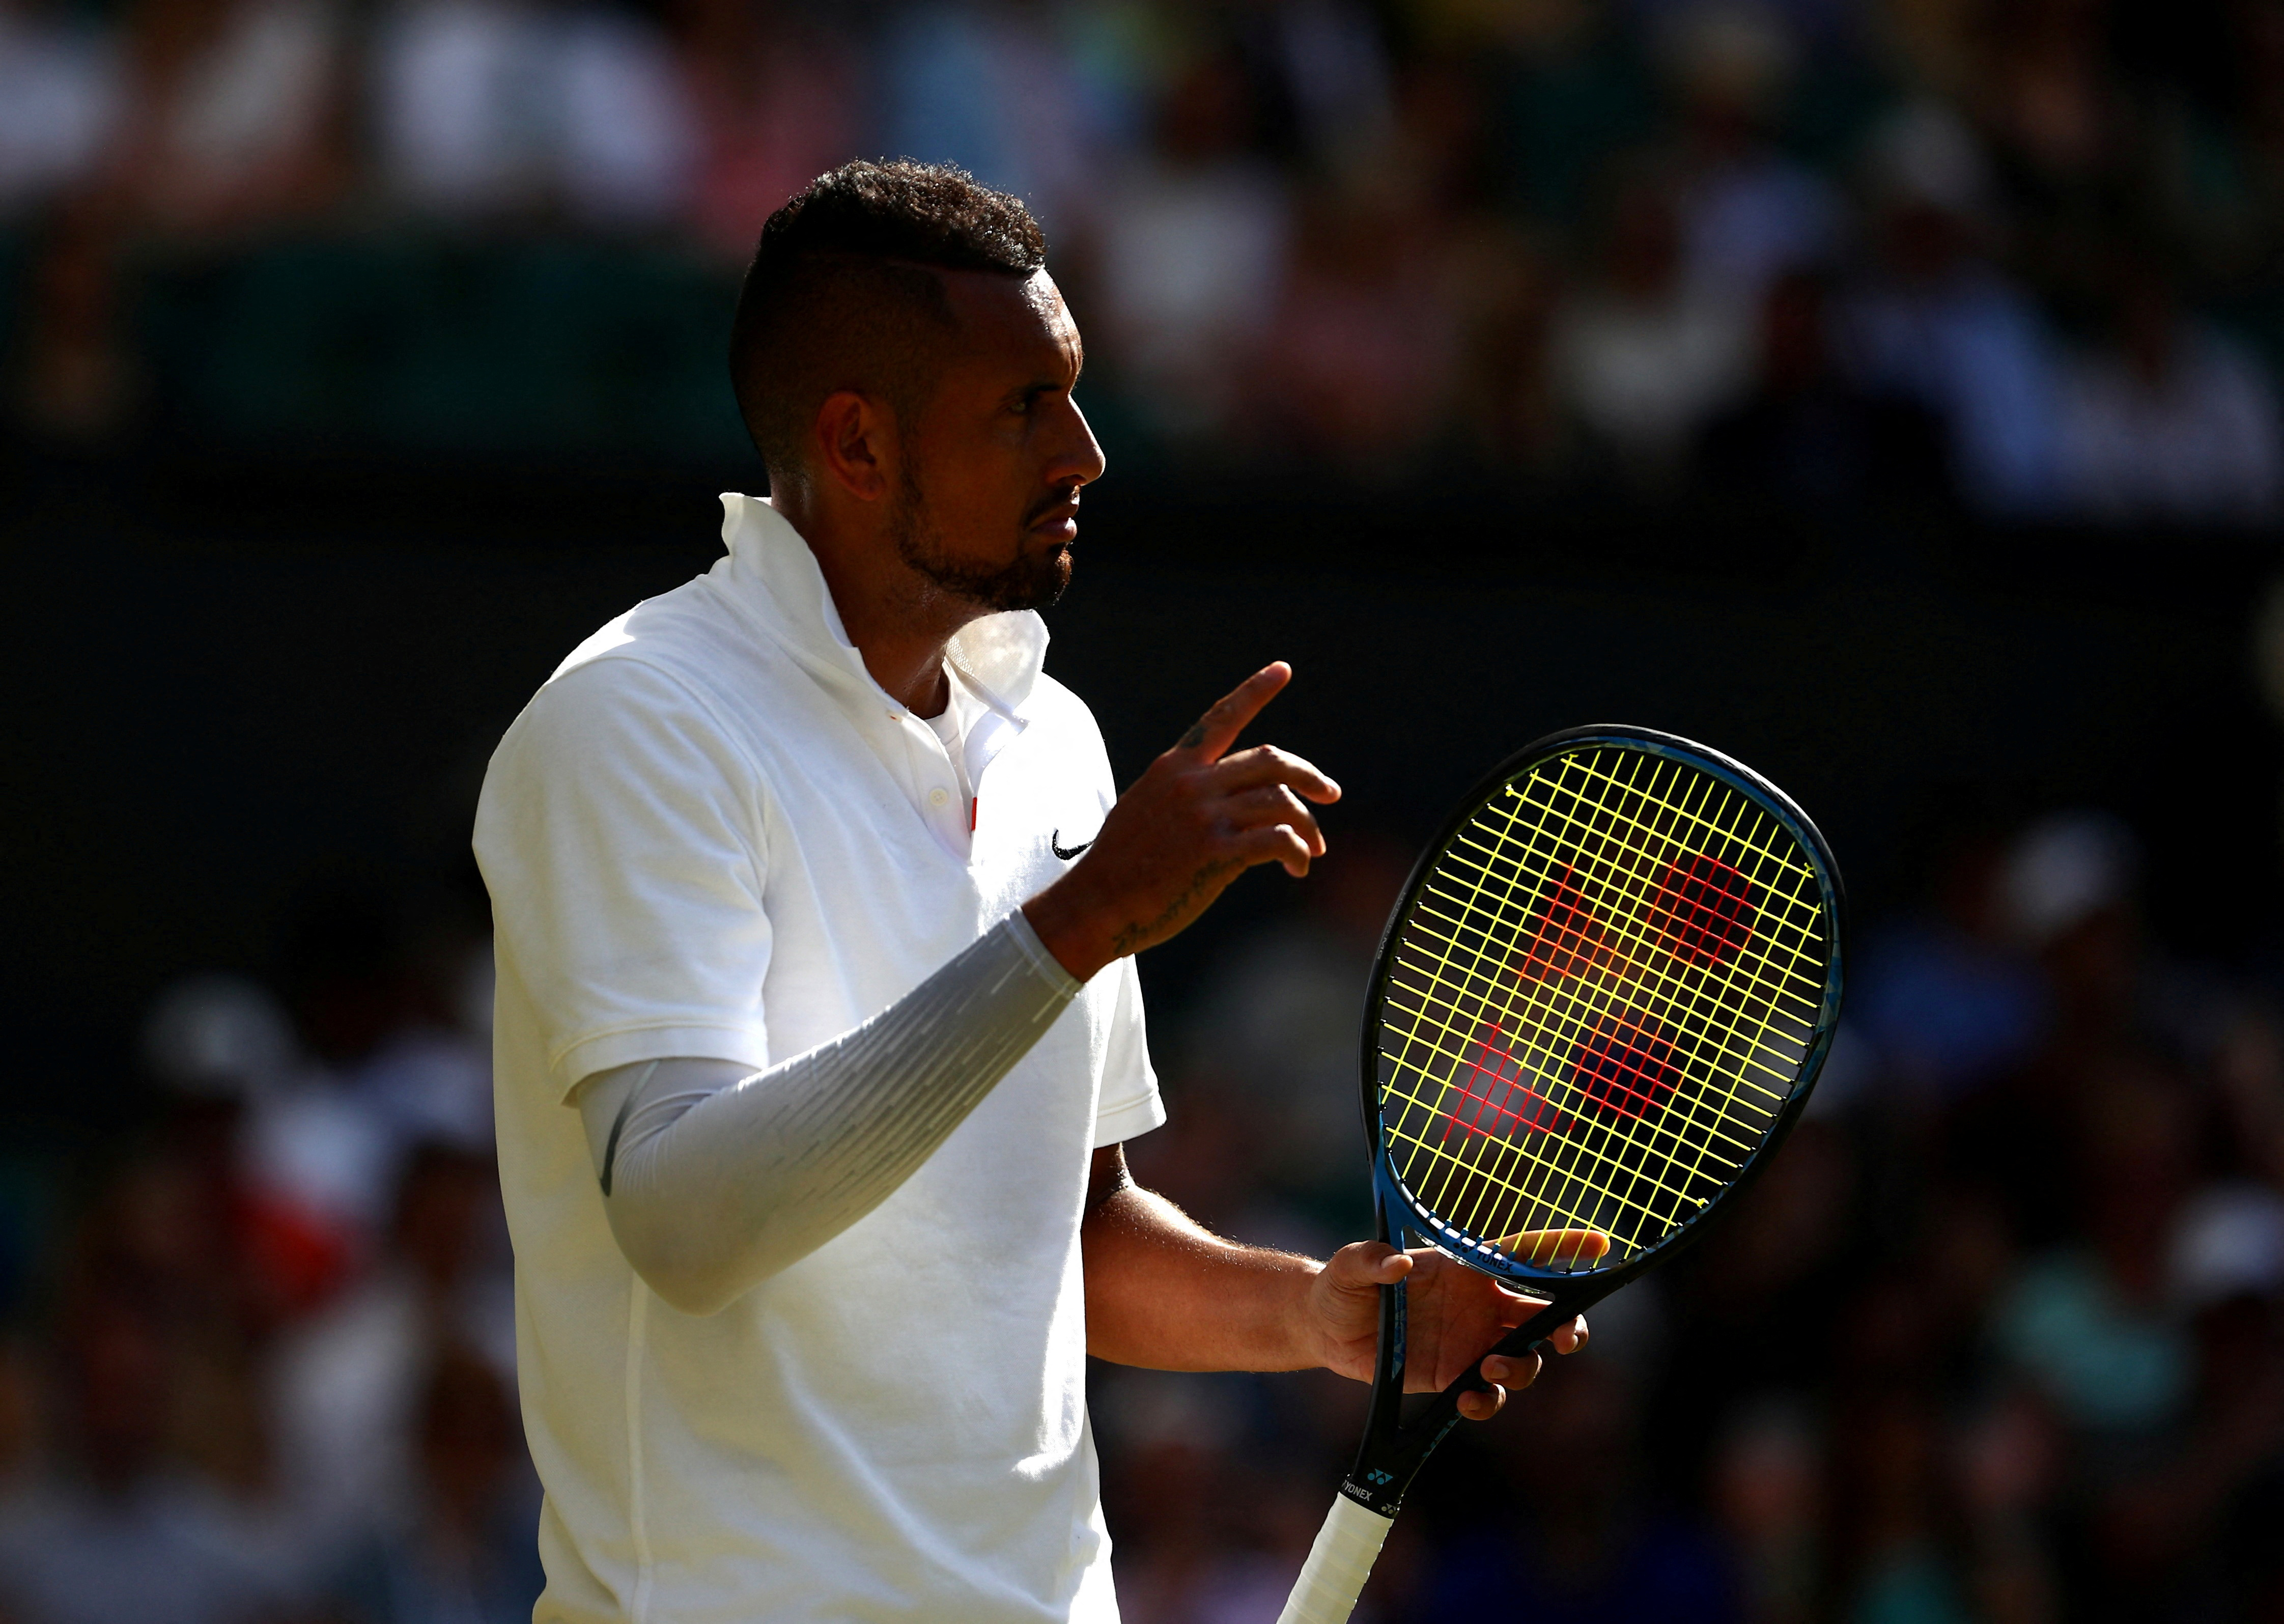 Nick Kyrgios arrives at Wimbledon practice wearing brand new